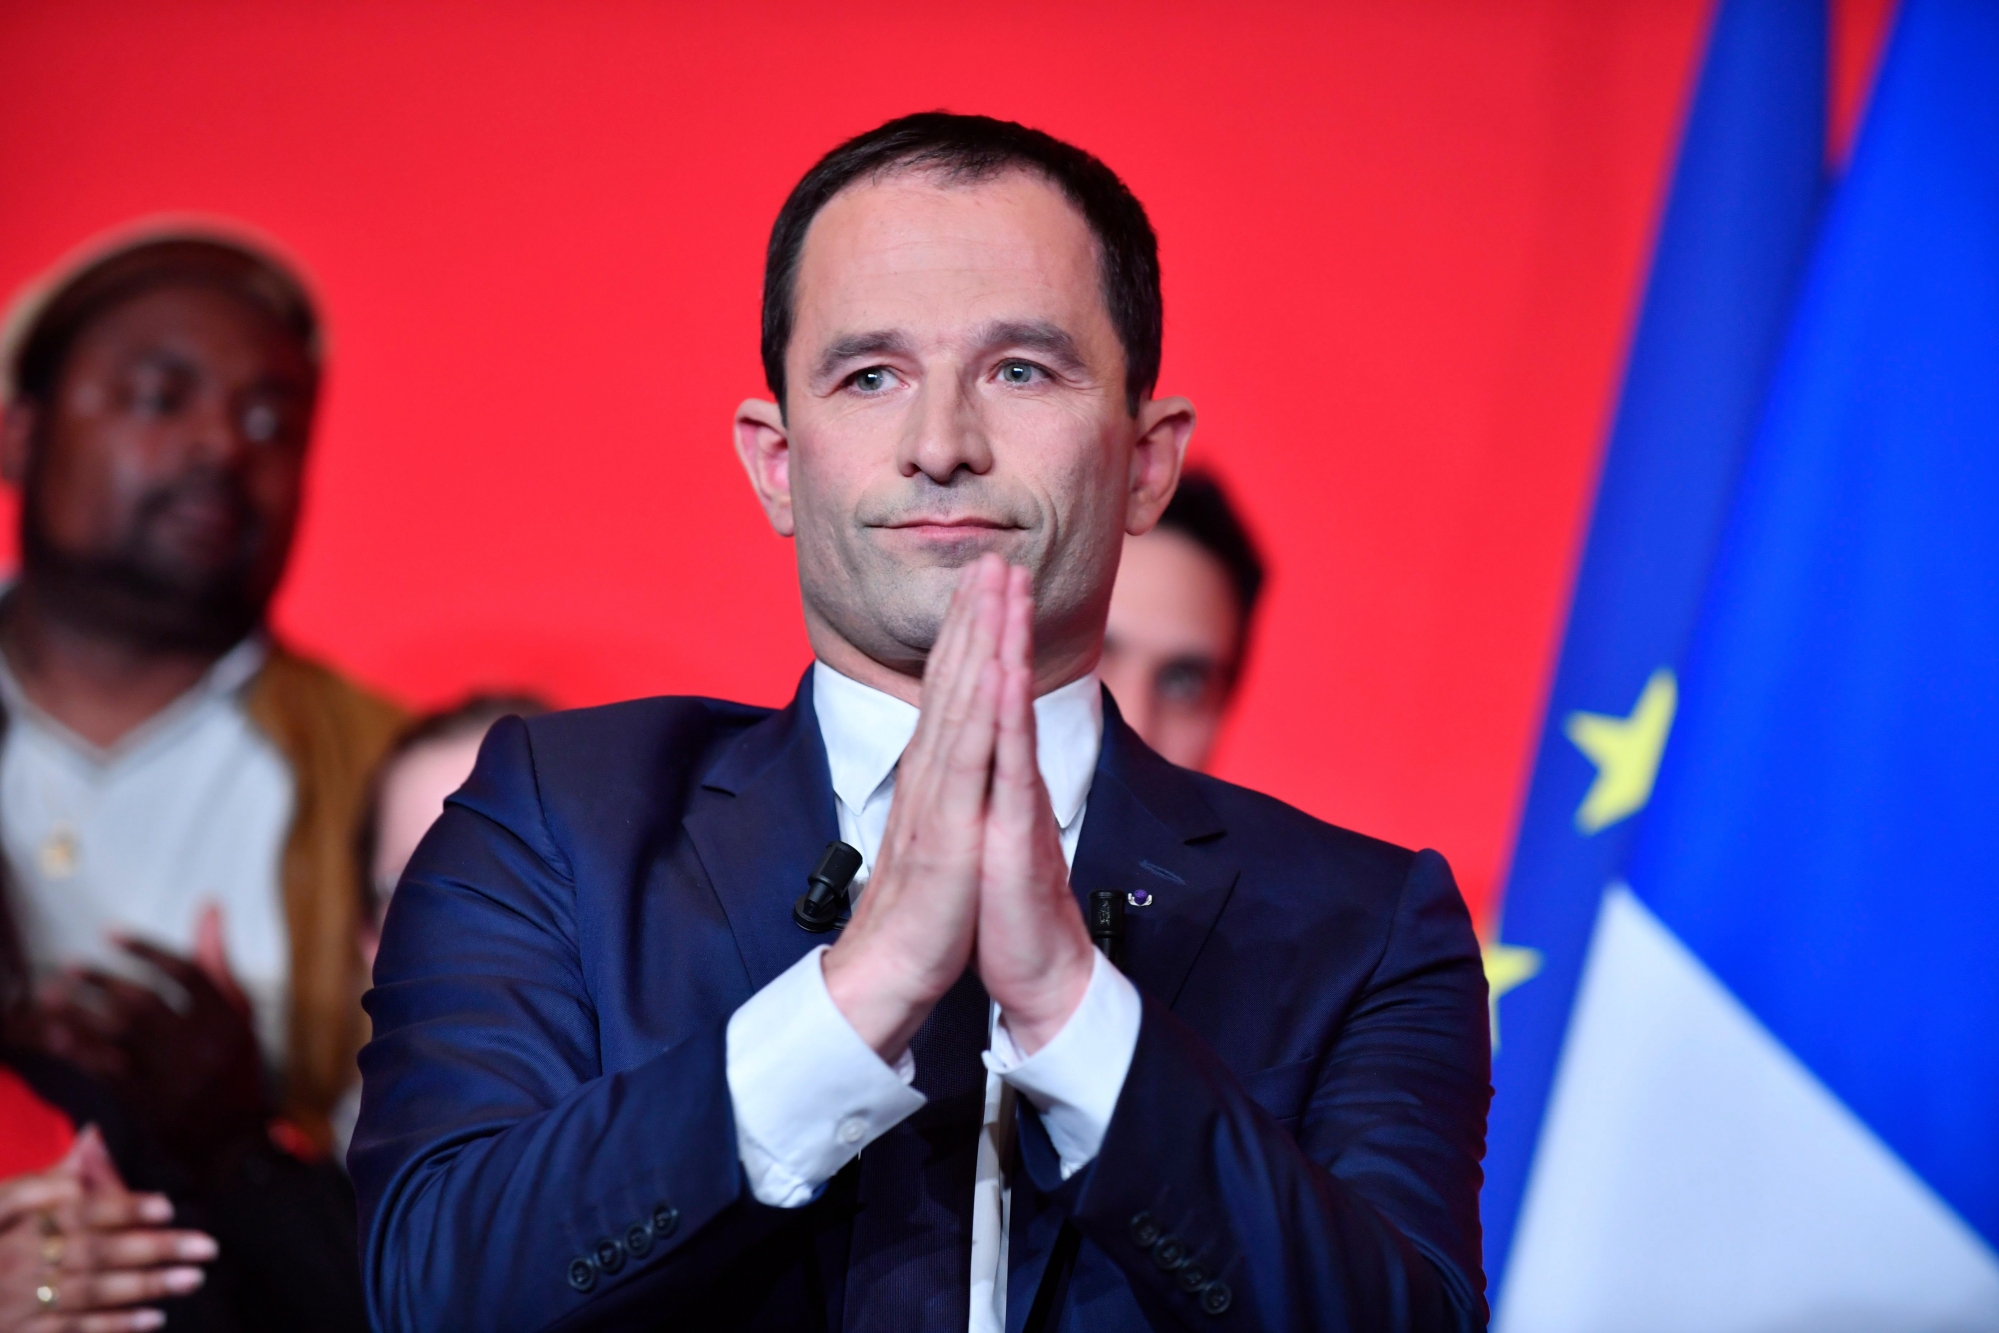 epa05924294 French presidential election candidate for the left-wing French Socialist (PS) party, Benoit Hamon delivers a speech after being defeated in the first round of the French presidential elections in Paris, France, 23 April 2017. France will hold the second round of the presidential elections on 07 May 2017.  EPA/JULIEN DE ROSA FRANCE PRESIDENTIAL ELECTIONS